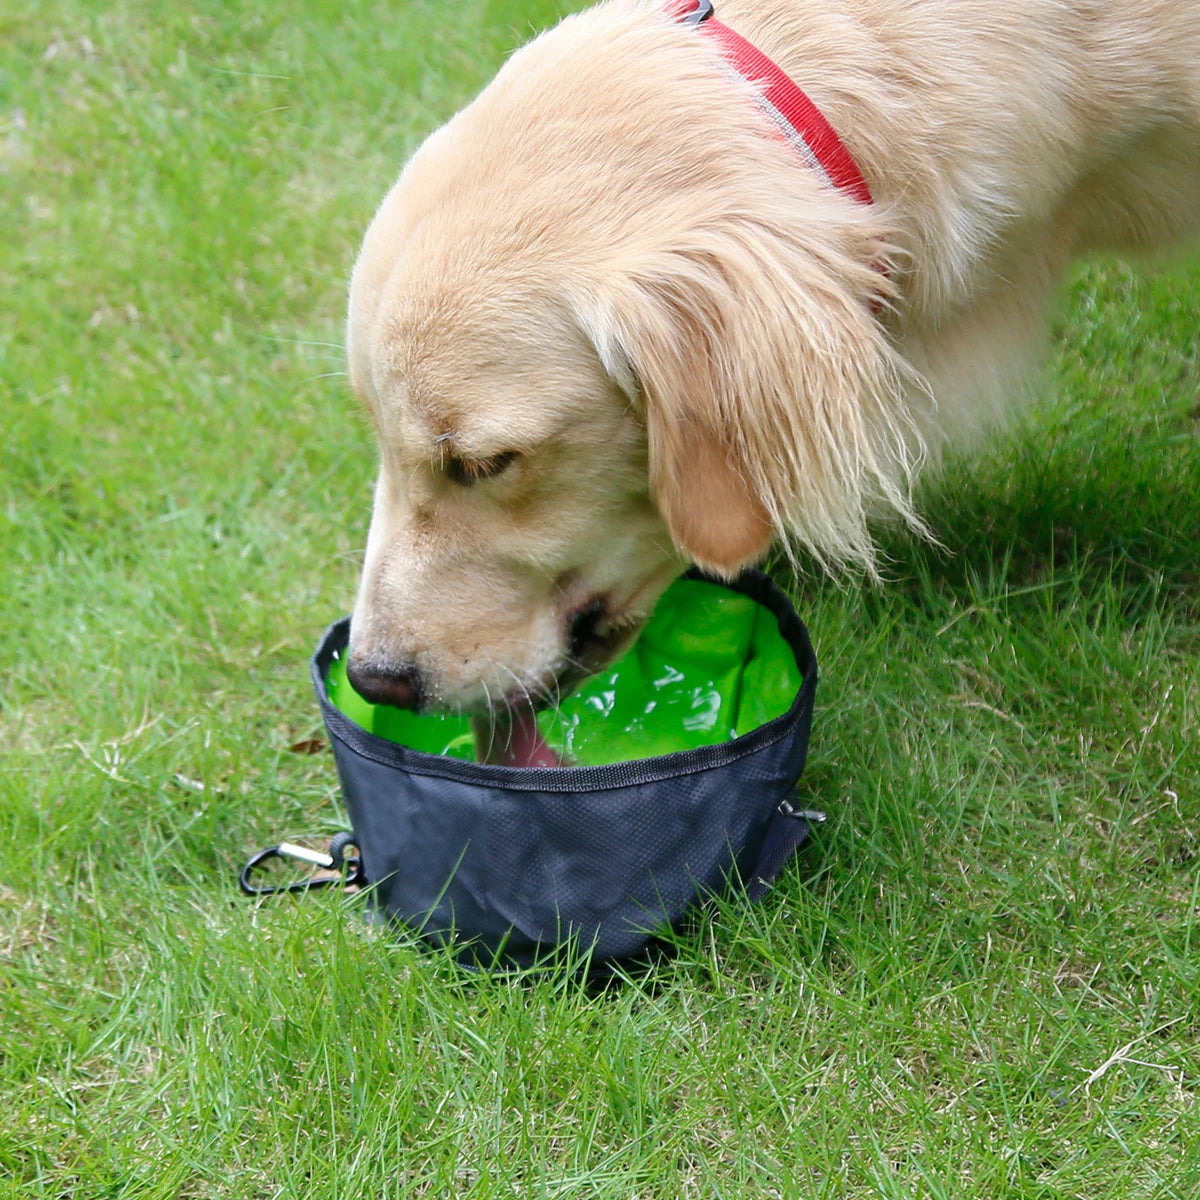 Big Volume Dog Drinking Container Foldable Dog Water Bowl Food Storage